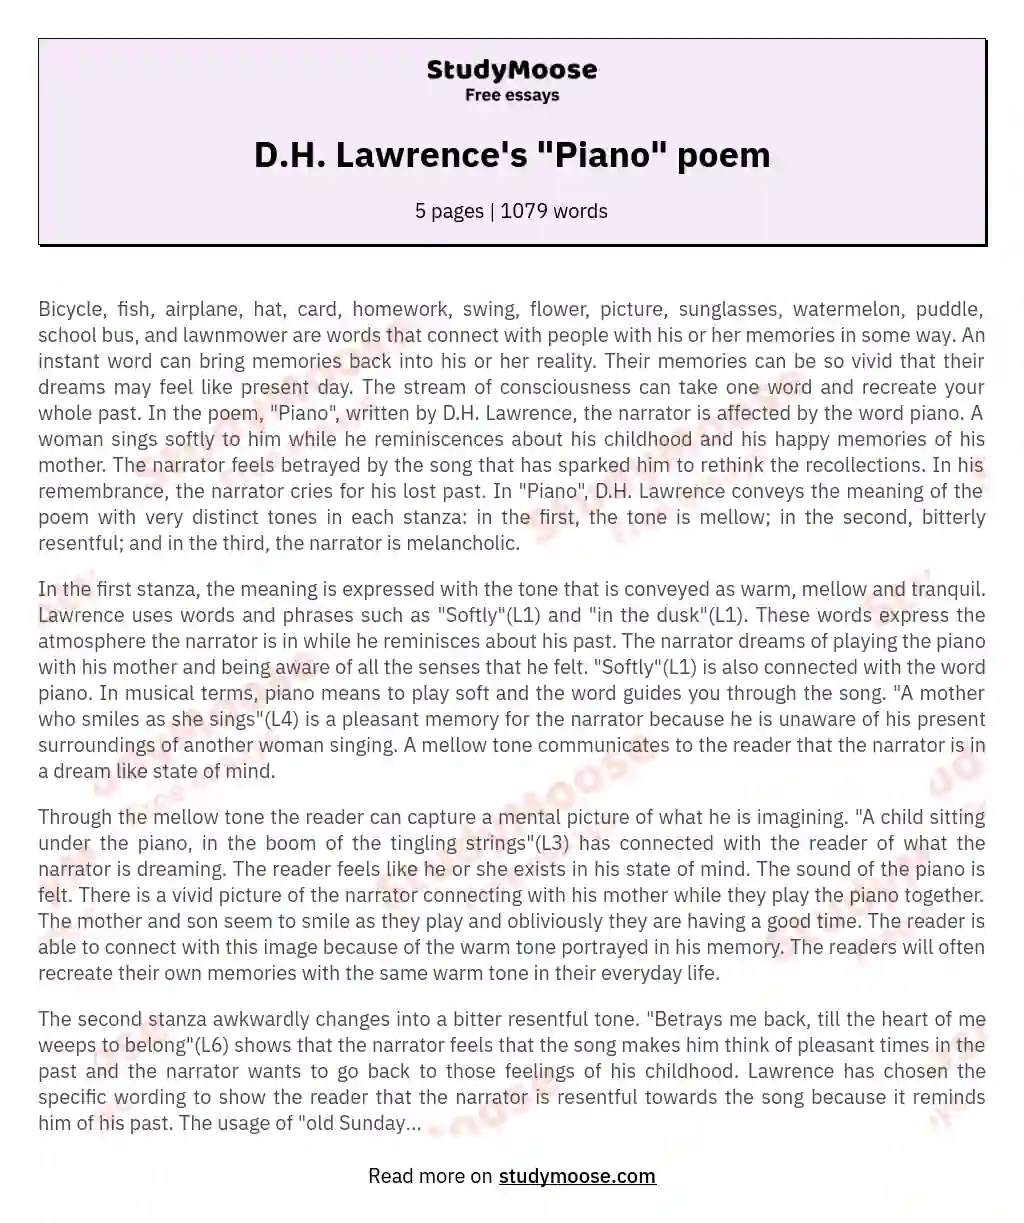 D.H. Lawrence's "Piano" poem essay